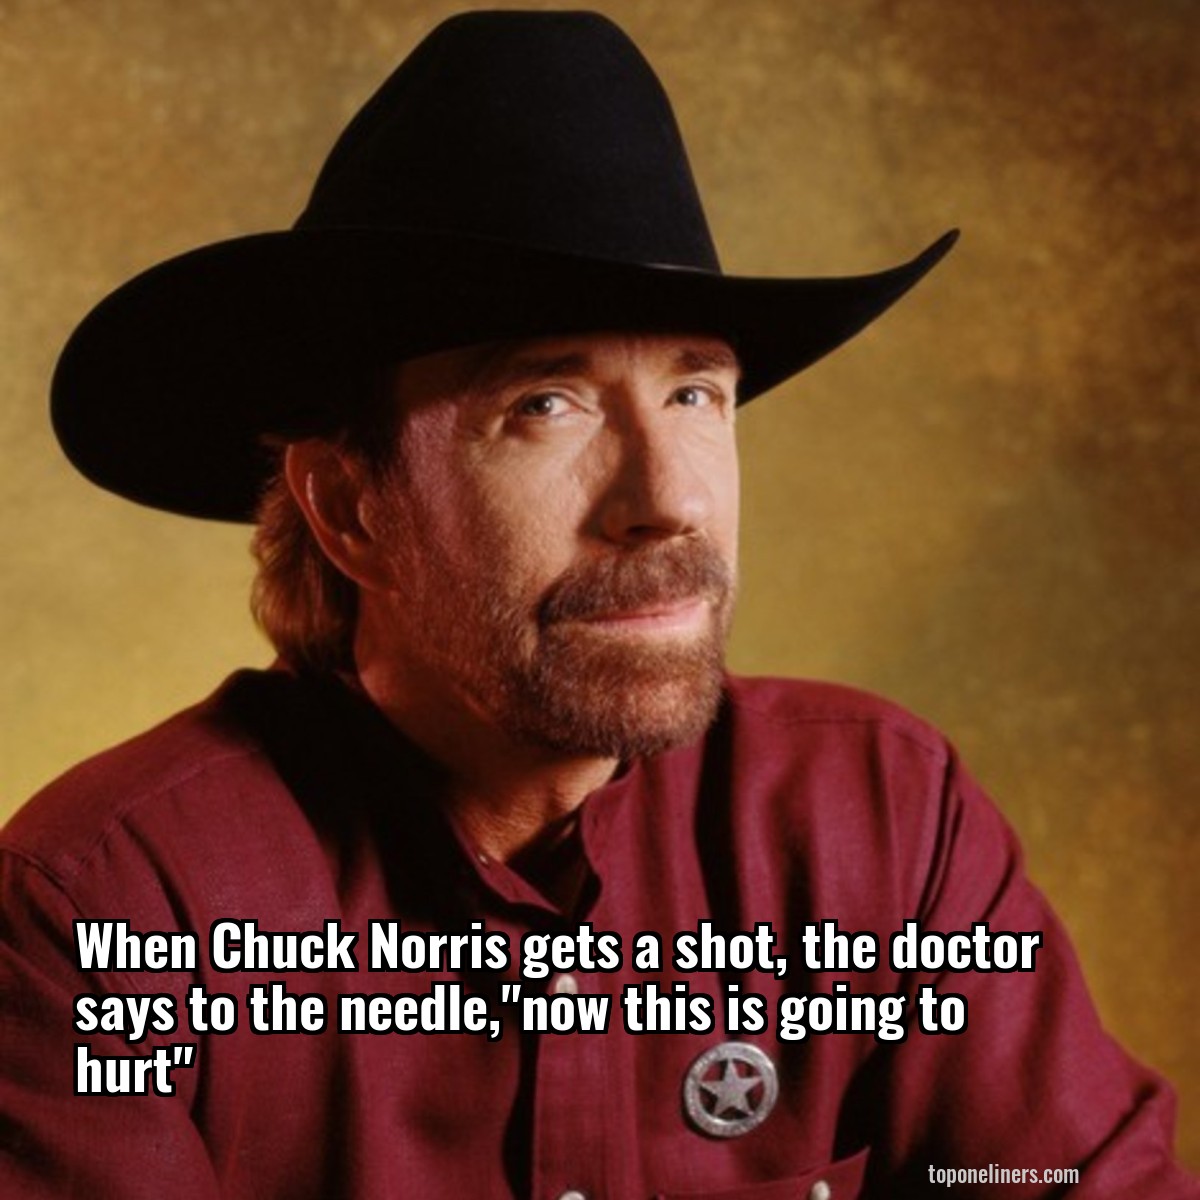 When Chuck Norris gets a shot, the doctor says to the needle,"now this is going to hurt"